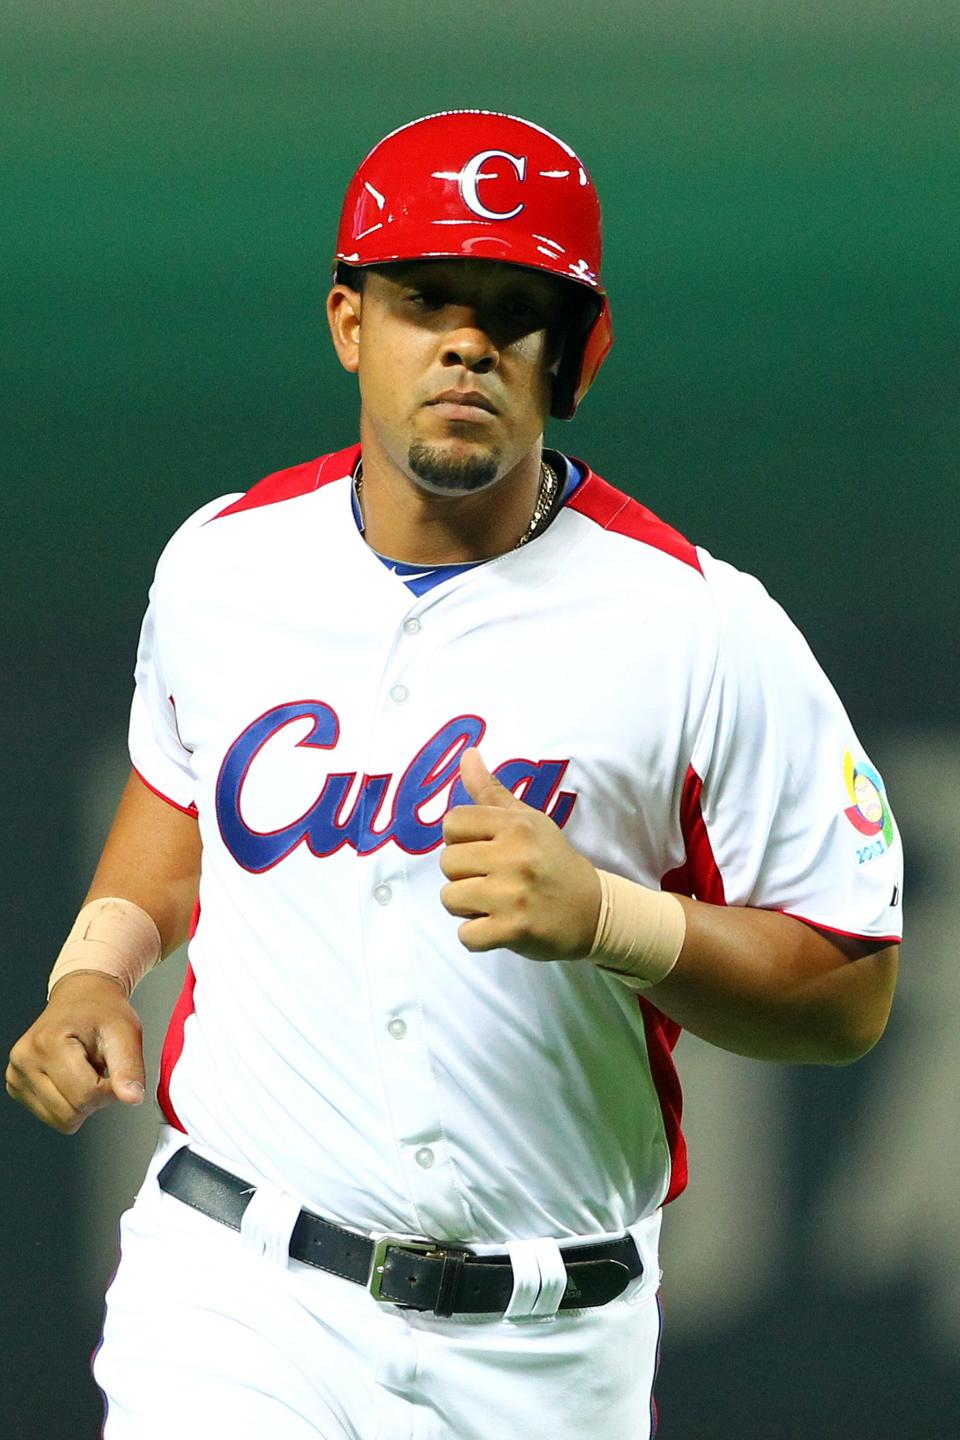 White Sox first baseman Jose Abreu played for Cuba in the 2013 World Baseball Classic before he defected to the United States.